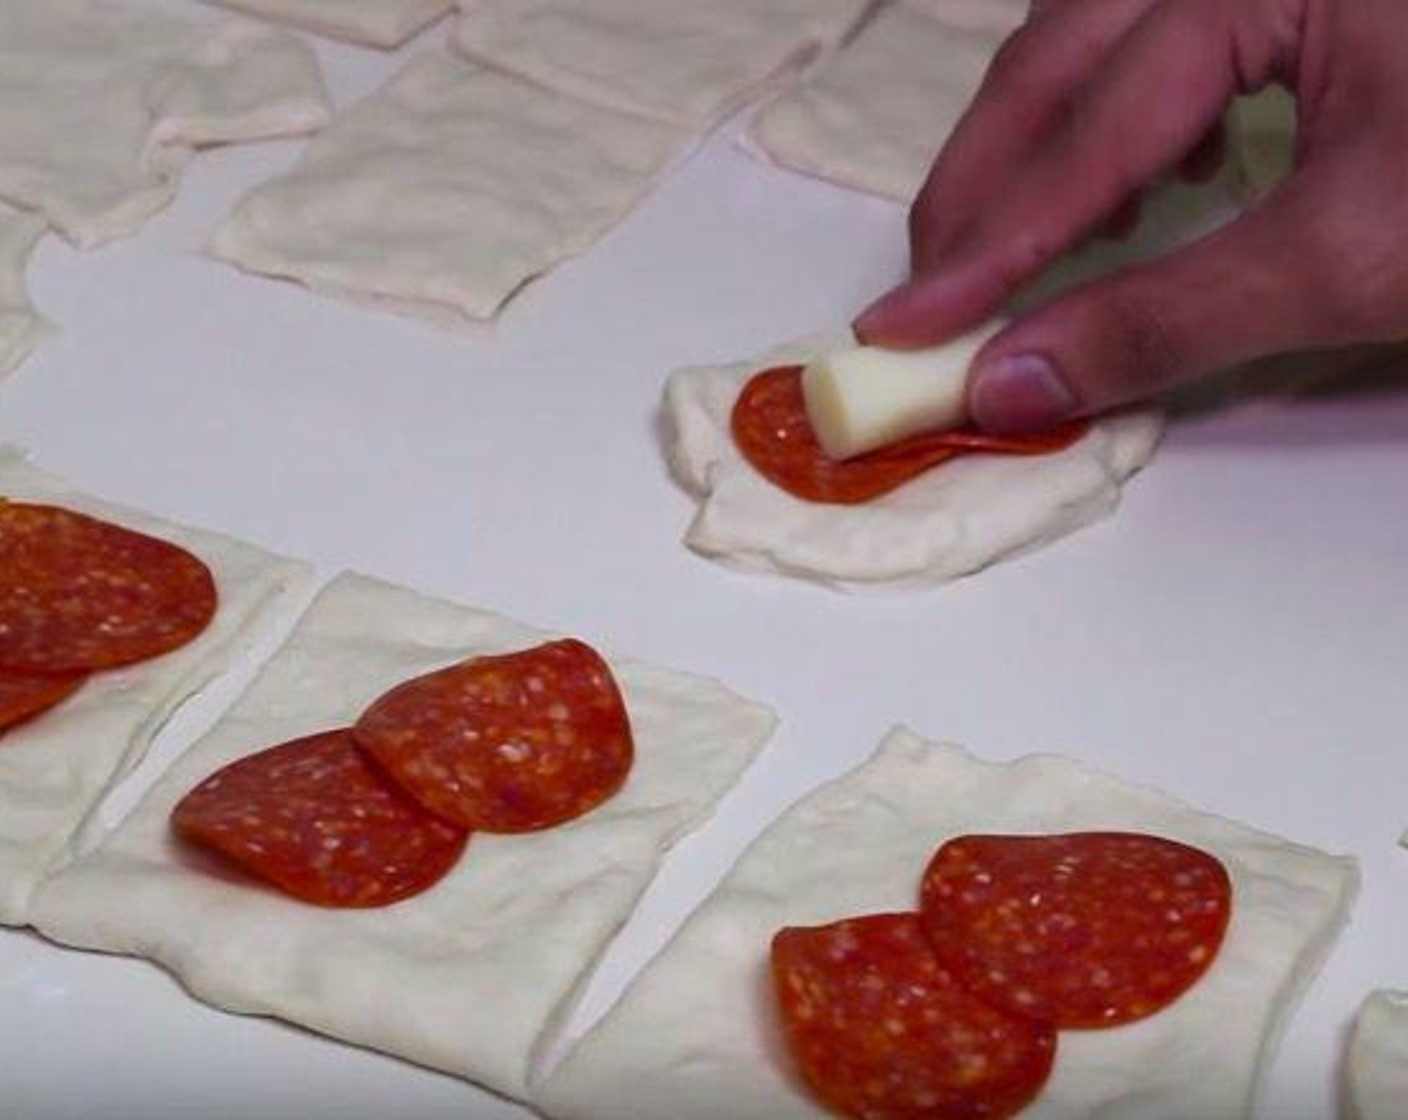 step 1 Put the Pizza Dough (1 lb) on a floured surface. Form it into a rectangle and evenly cut the dough into 24 pieces. Put 2 pieces Pepperoni Slices (to taste) and one piece of Mozzarella Cheese (to taste) for each dough.